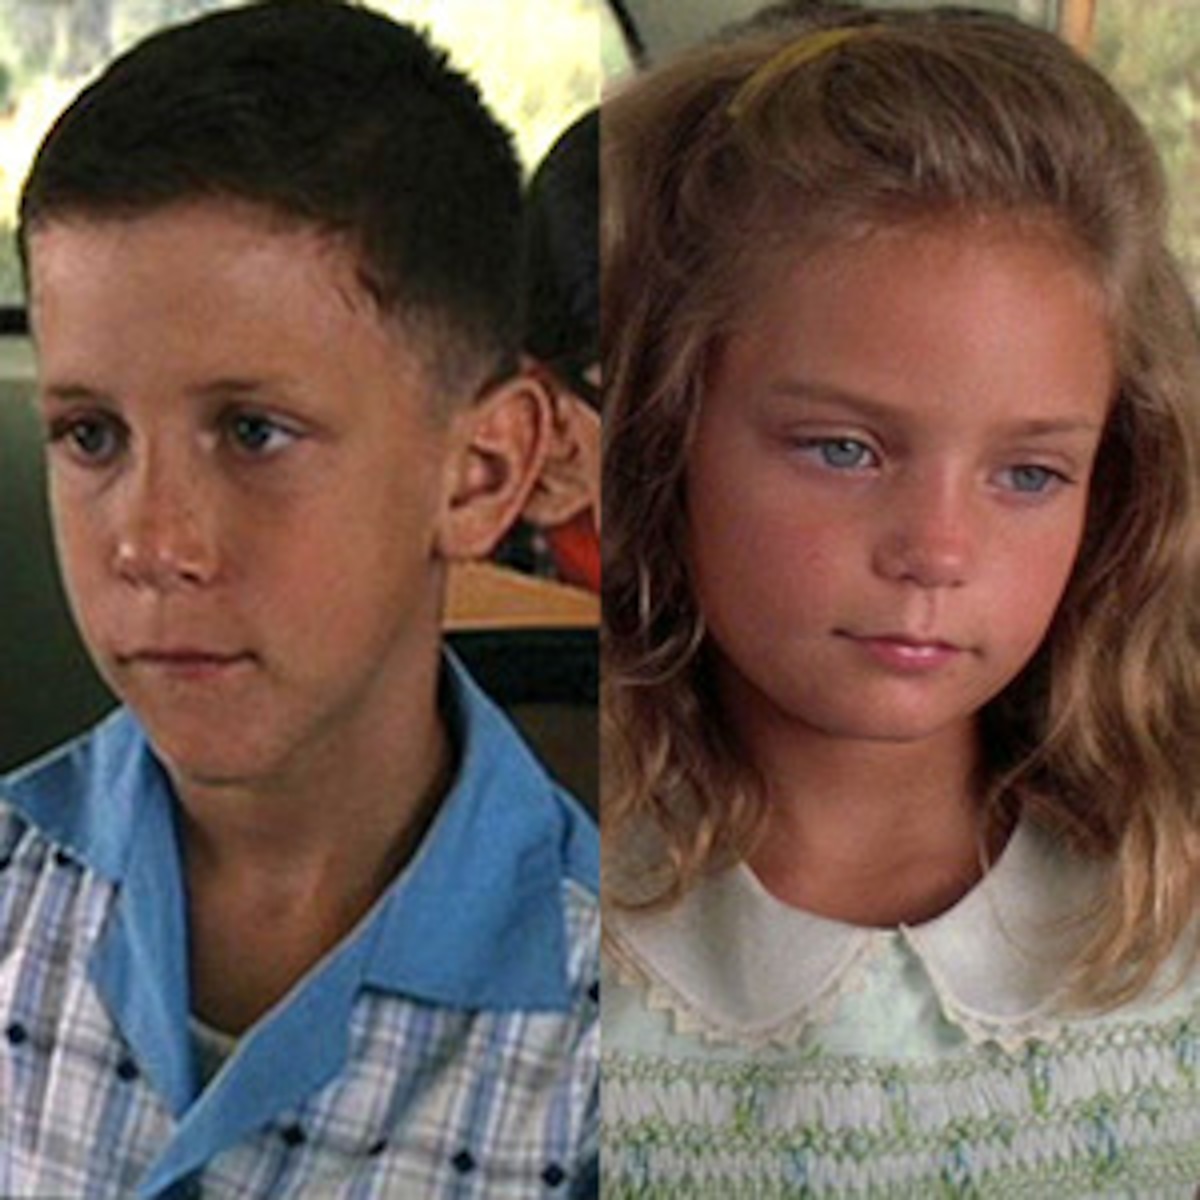 Forrest Gump 20 Years Later: See Young Forrest & Jenny Today!